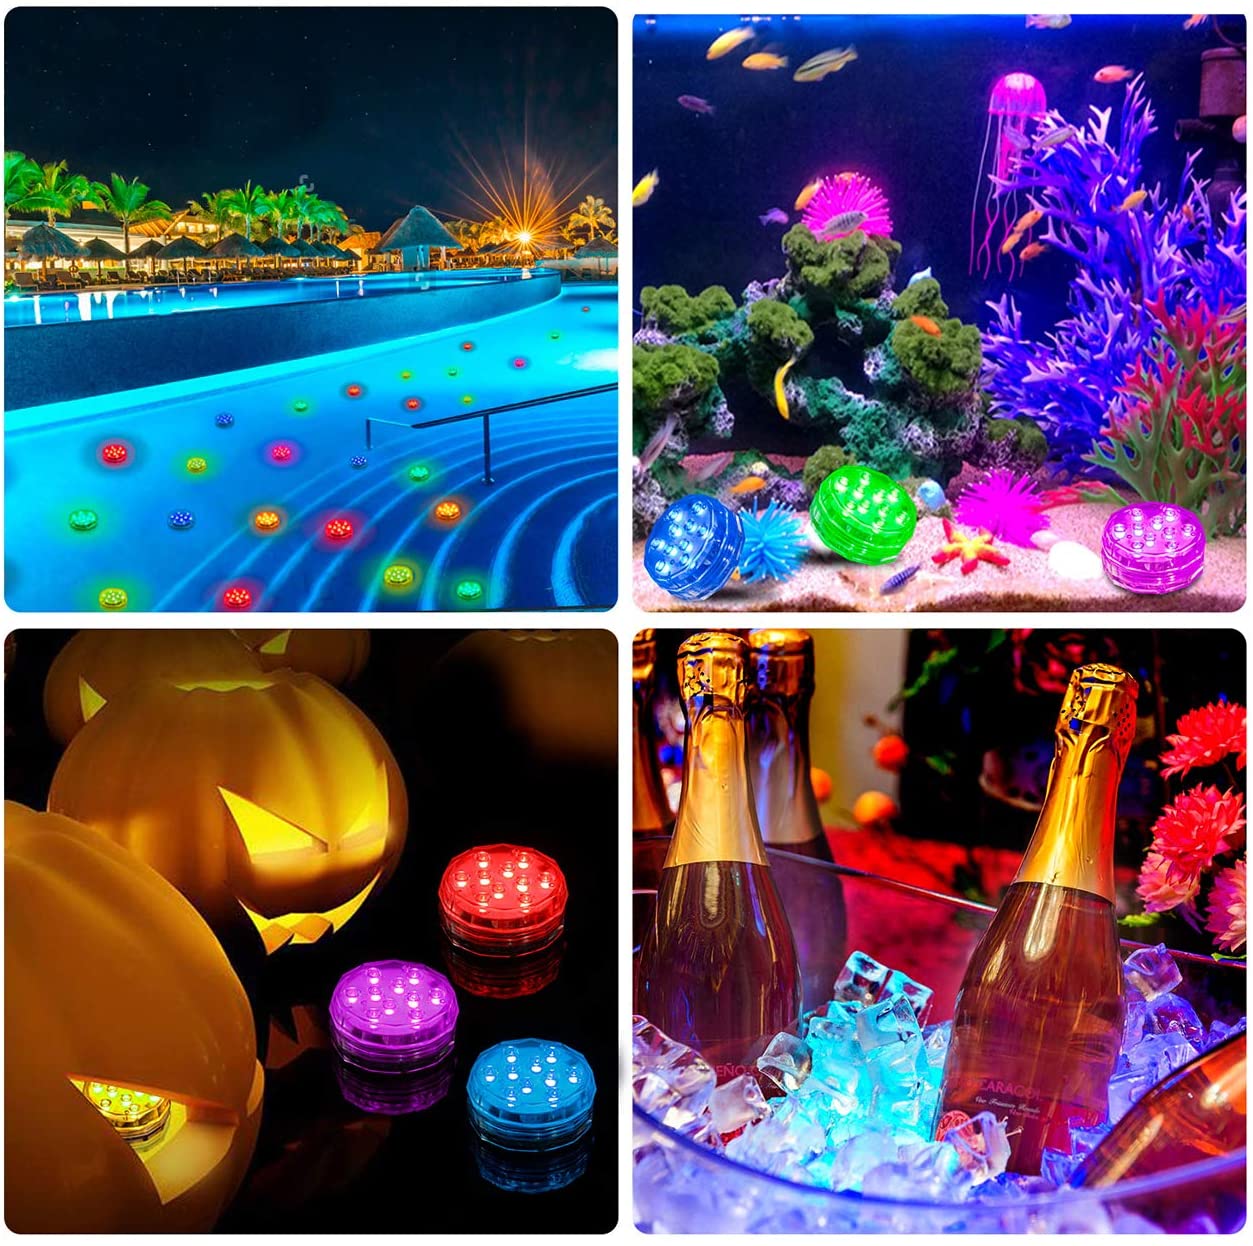 TEPENAR Submersible Led Lights with Remote - Waterproof Underwater Led Light Battery Operated Controlled 16 Color Changing Lamp with 4pcs Suction Cup for Pool Vase Aquarium Decoration 2 Pack